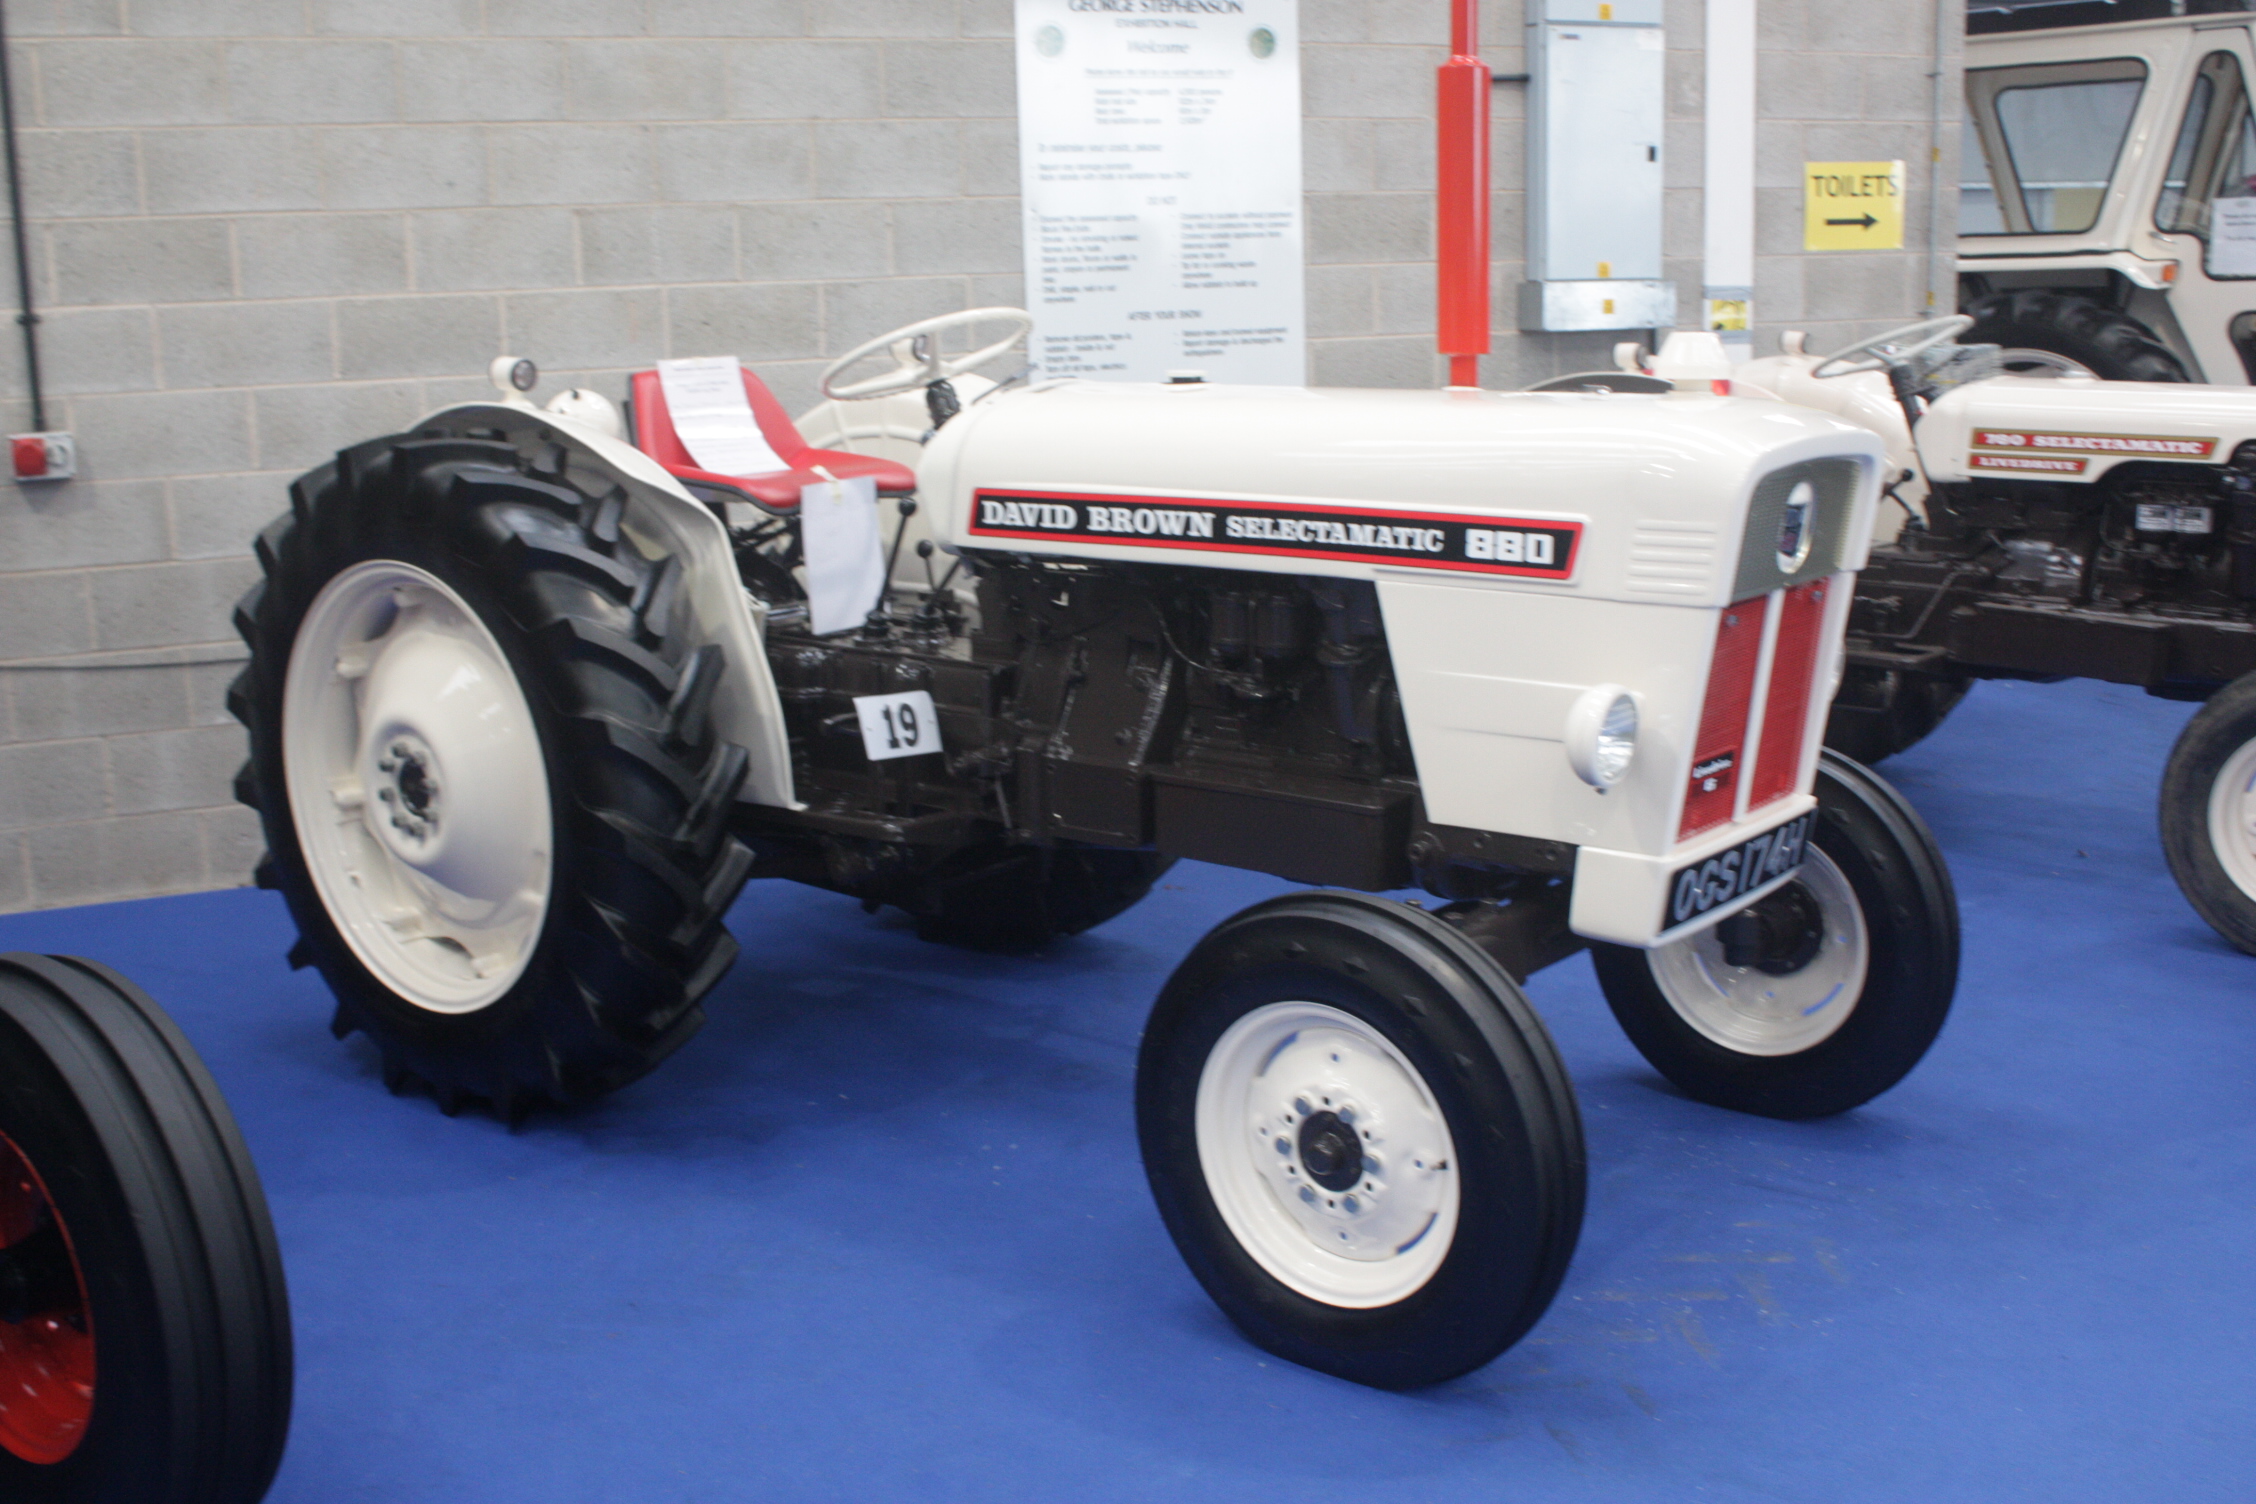 David Brown 880 Selectamatic - Tractor & Construction Plant Wiki - The ...